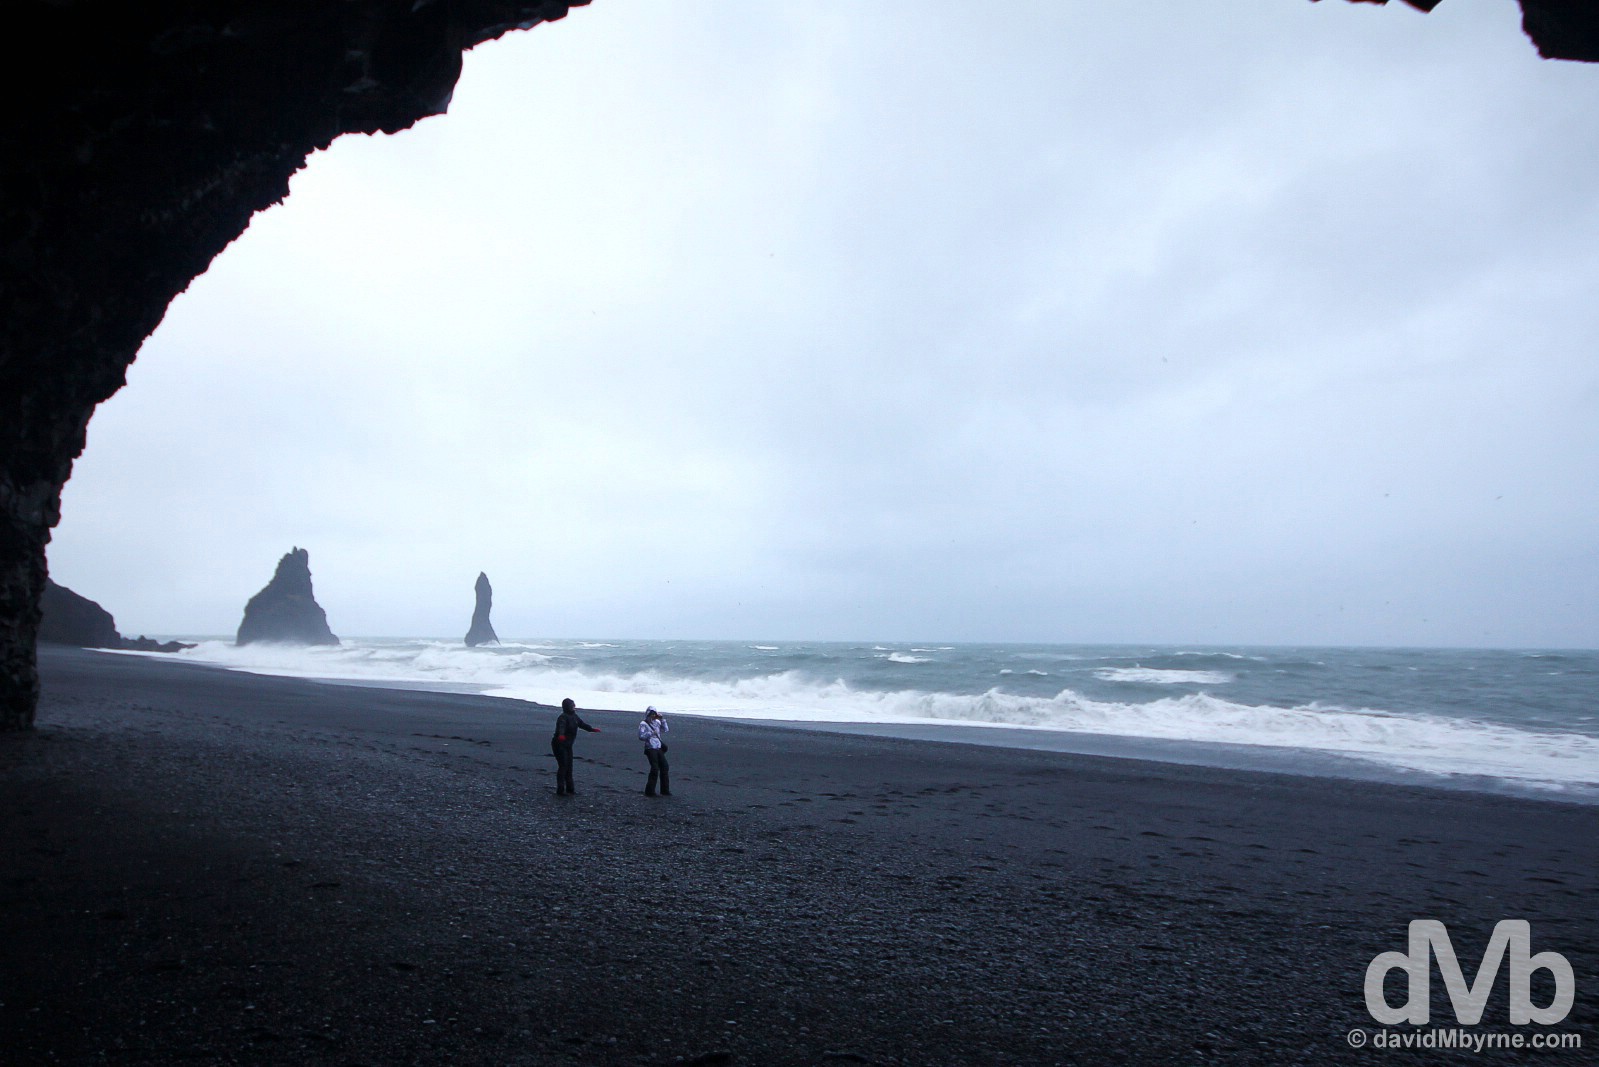 Braving the elements on the black sand beach at the base of the hill Reynisfjall in Myrdalur, southern Iceland. December 5, 2012.